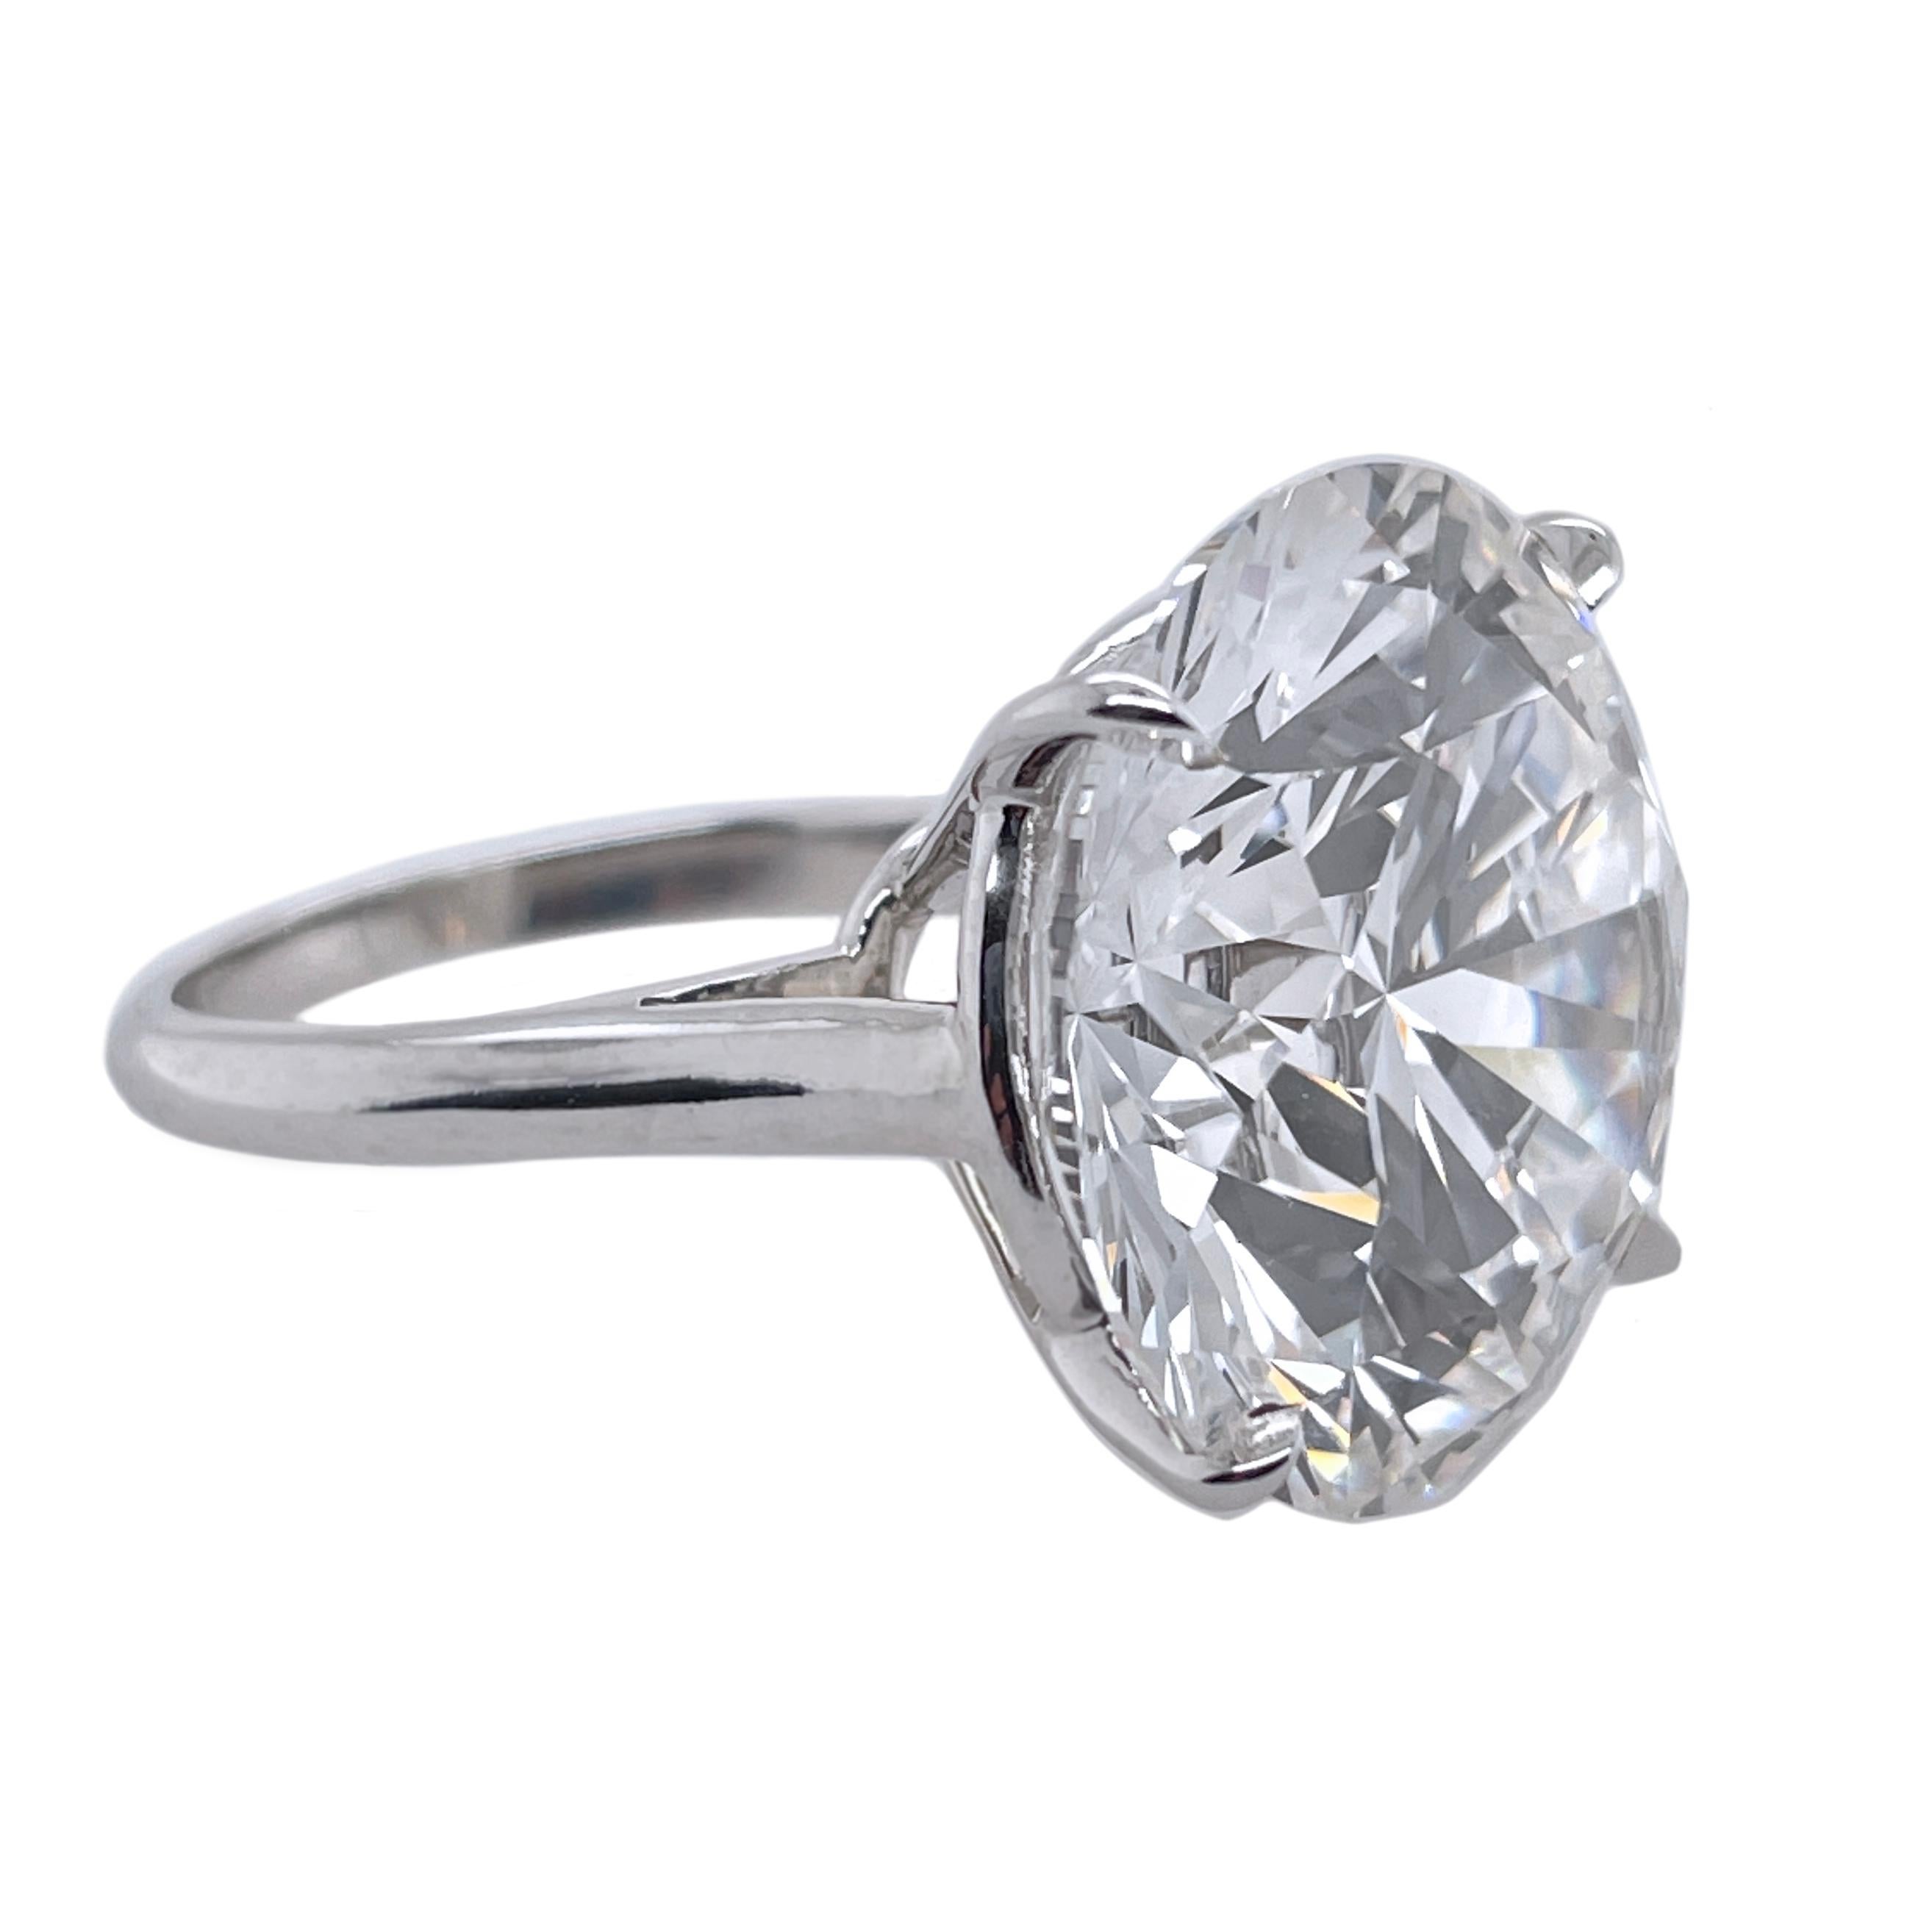 21.05 Carat Round Brilliant Cut Diamond Ring, GIA Certified In New Condition For Sale In New York, NY